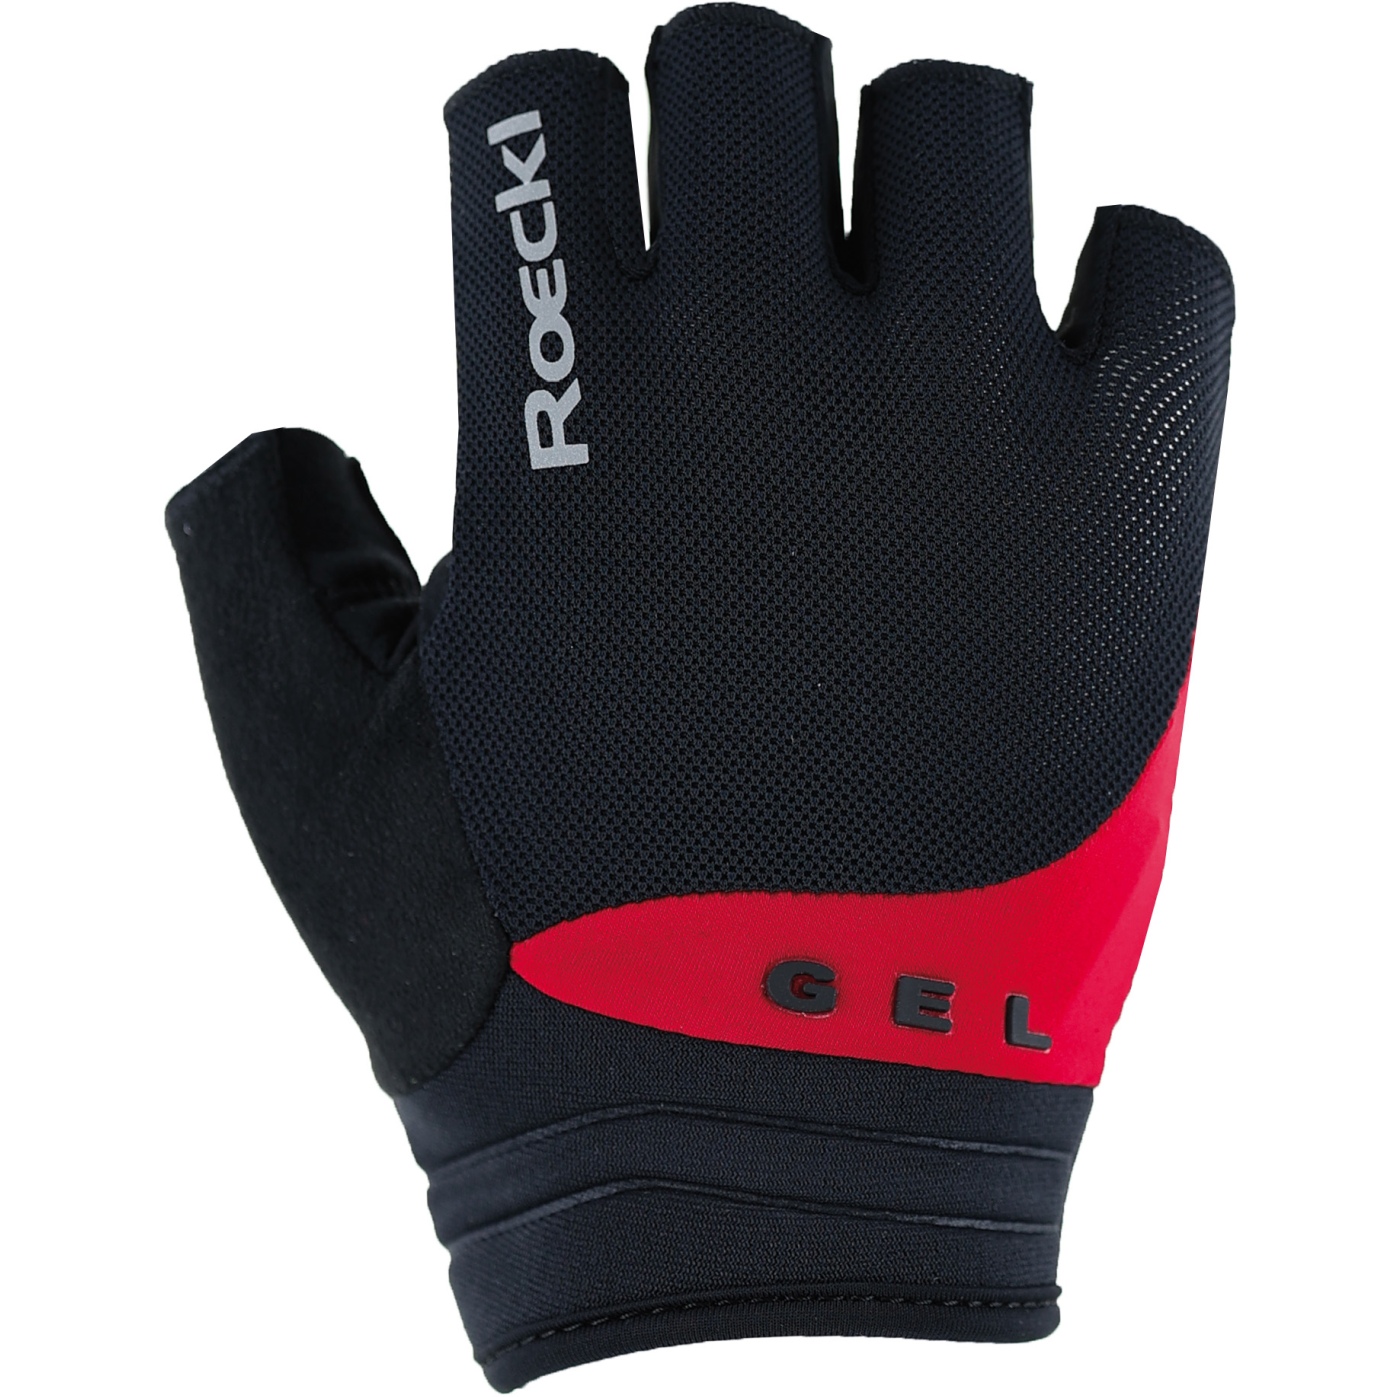 Picture of Roeckl Sports Itamos 2 Cycling Gloves - black/red 9300